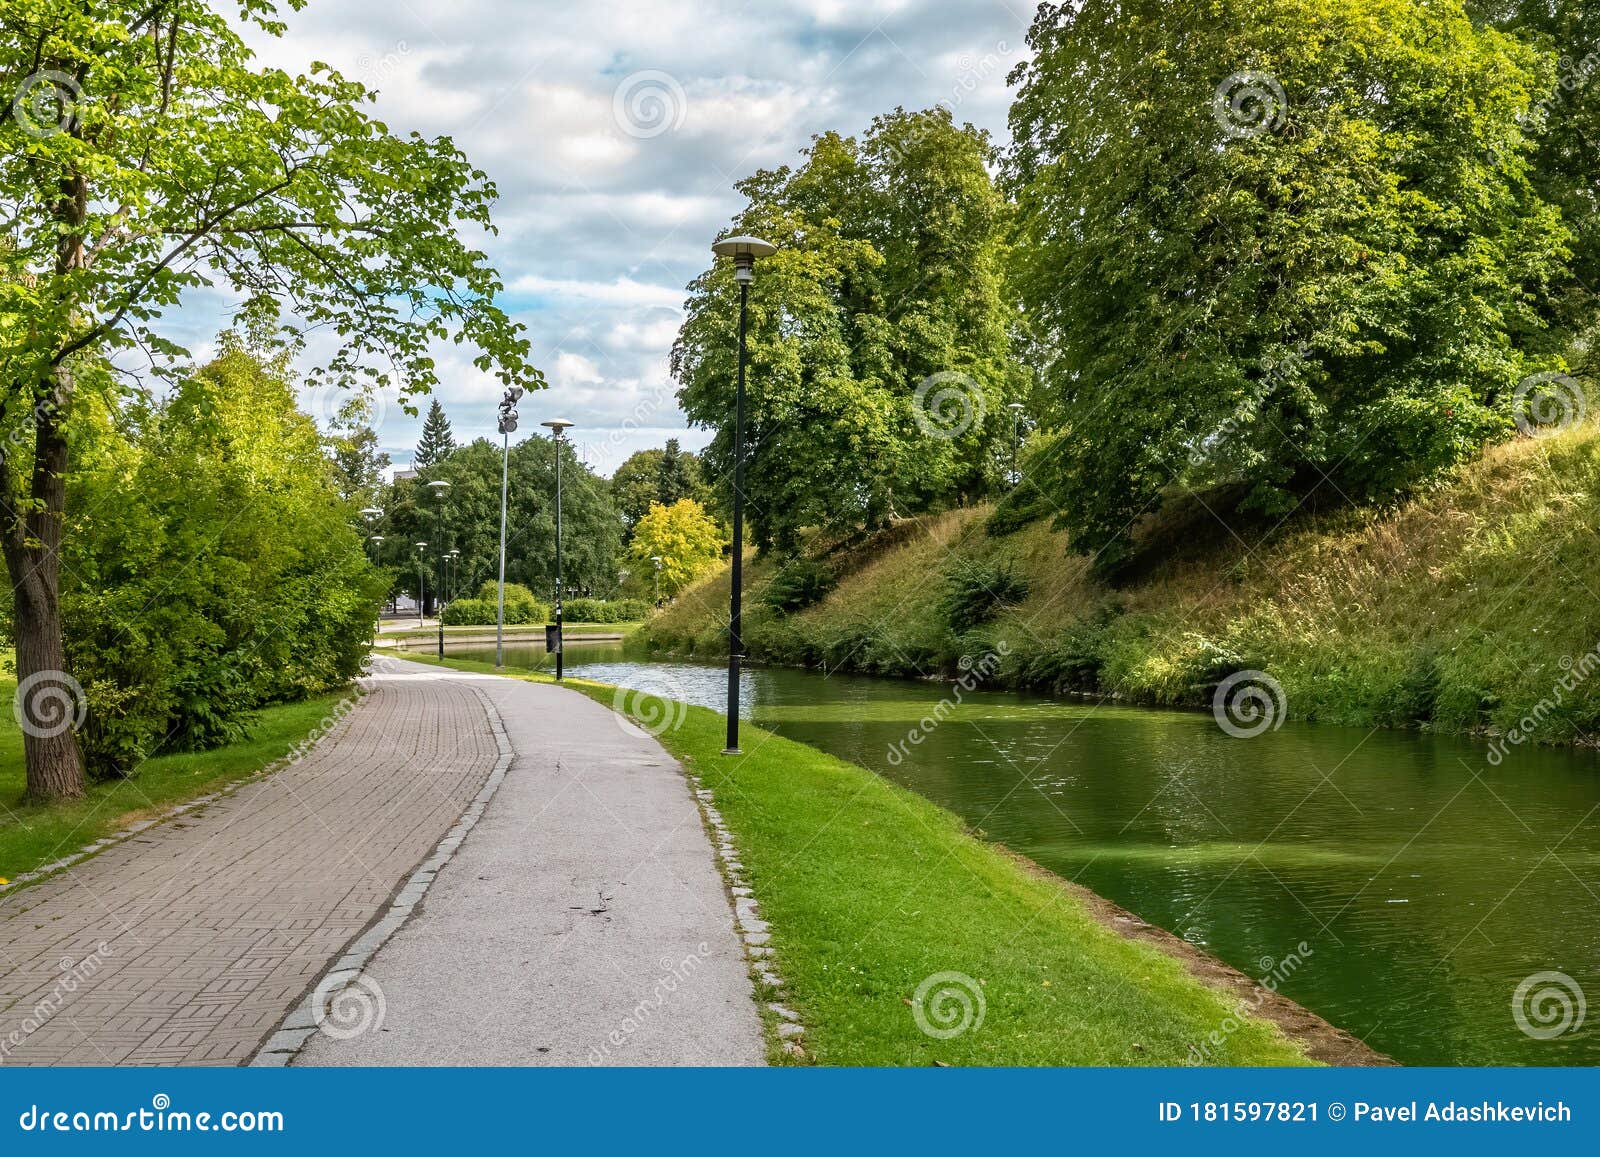 a pond in snelli park, tallinn, estonia. green trees and sidewalk on summer day with clouds